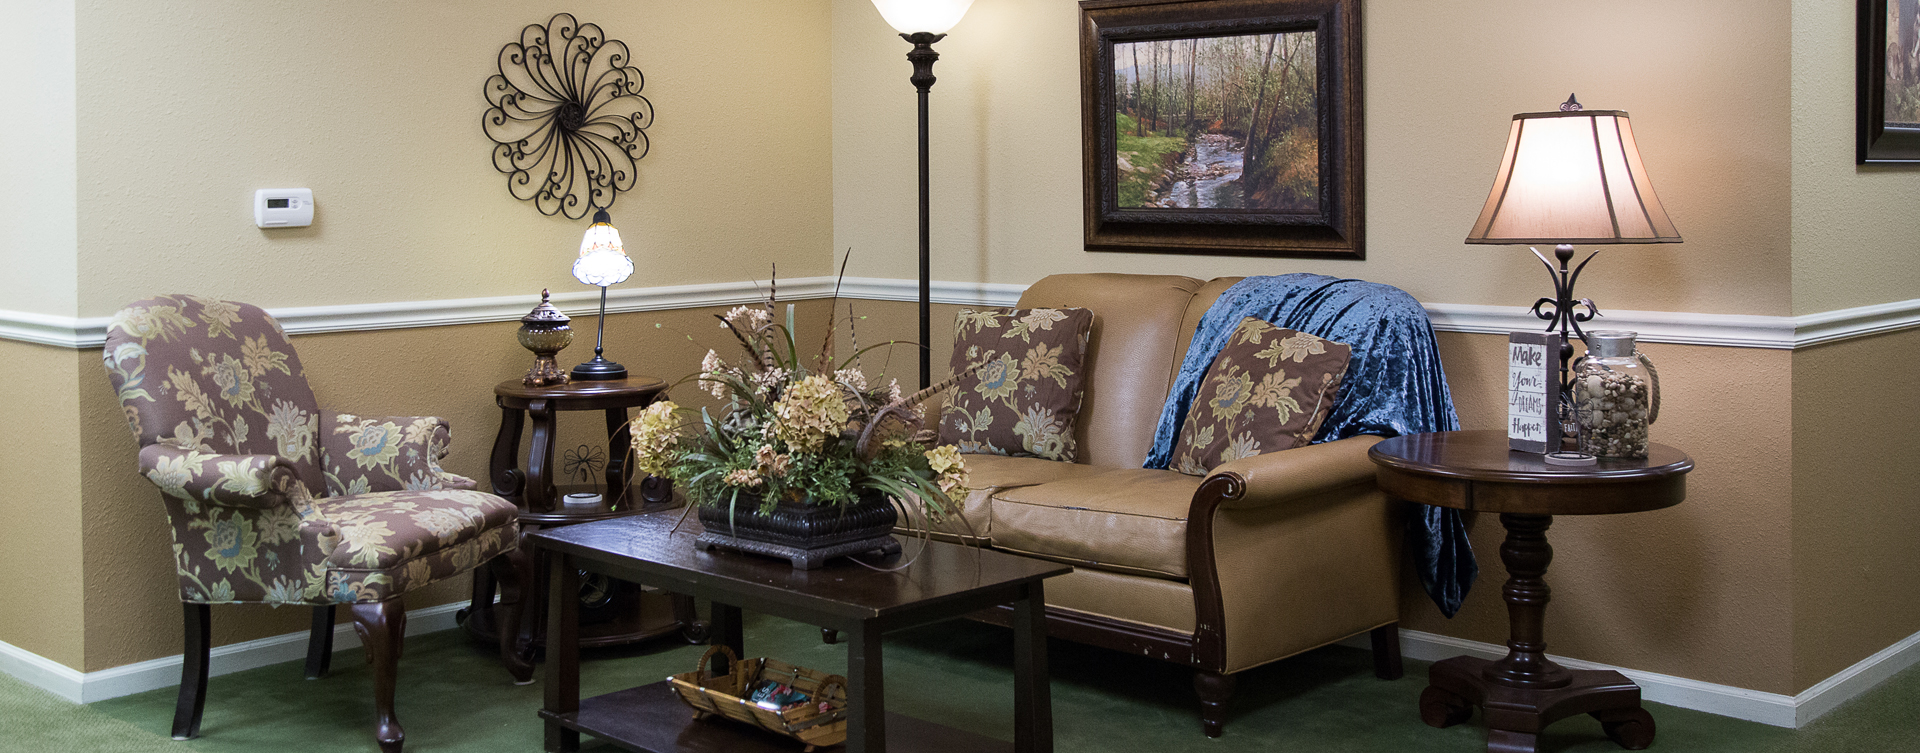 Enjoy a good book in the sitting area at Bickford of Moline